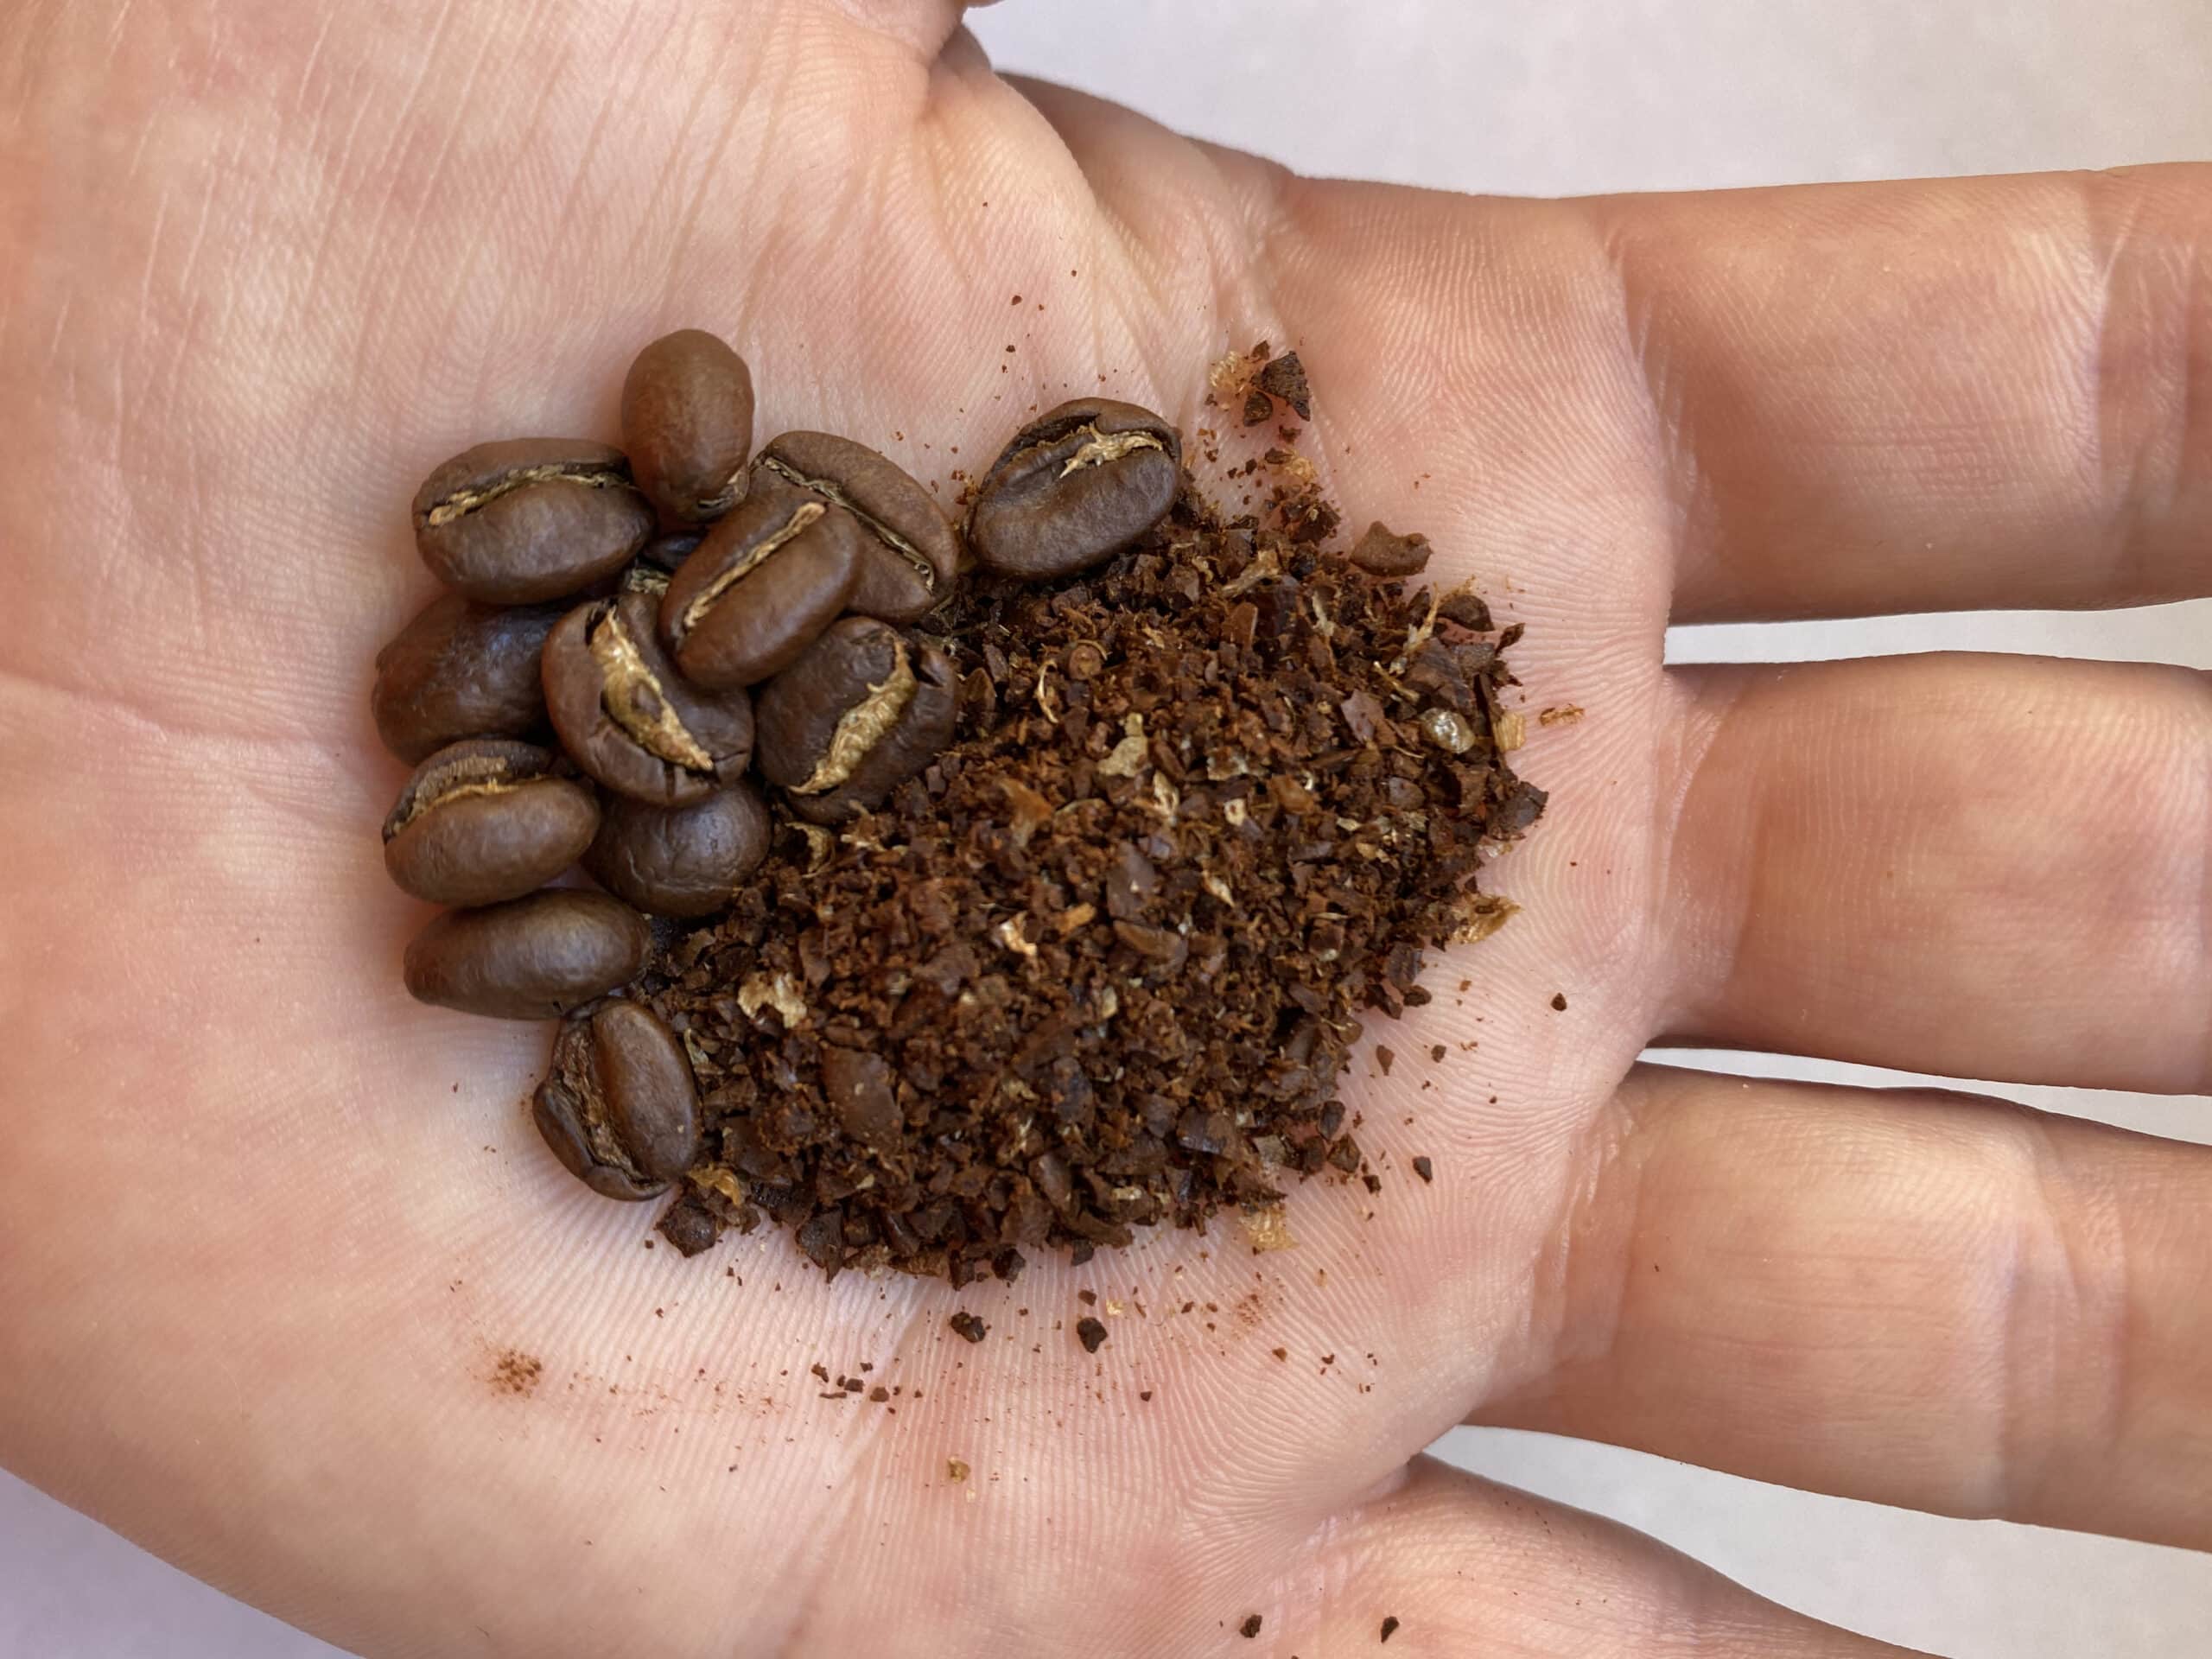 crushed coffee beans lie on the hand close-up